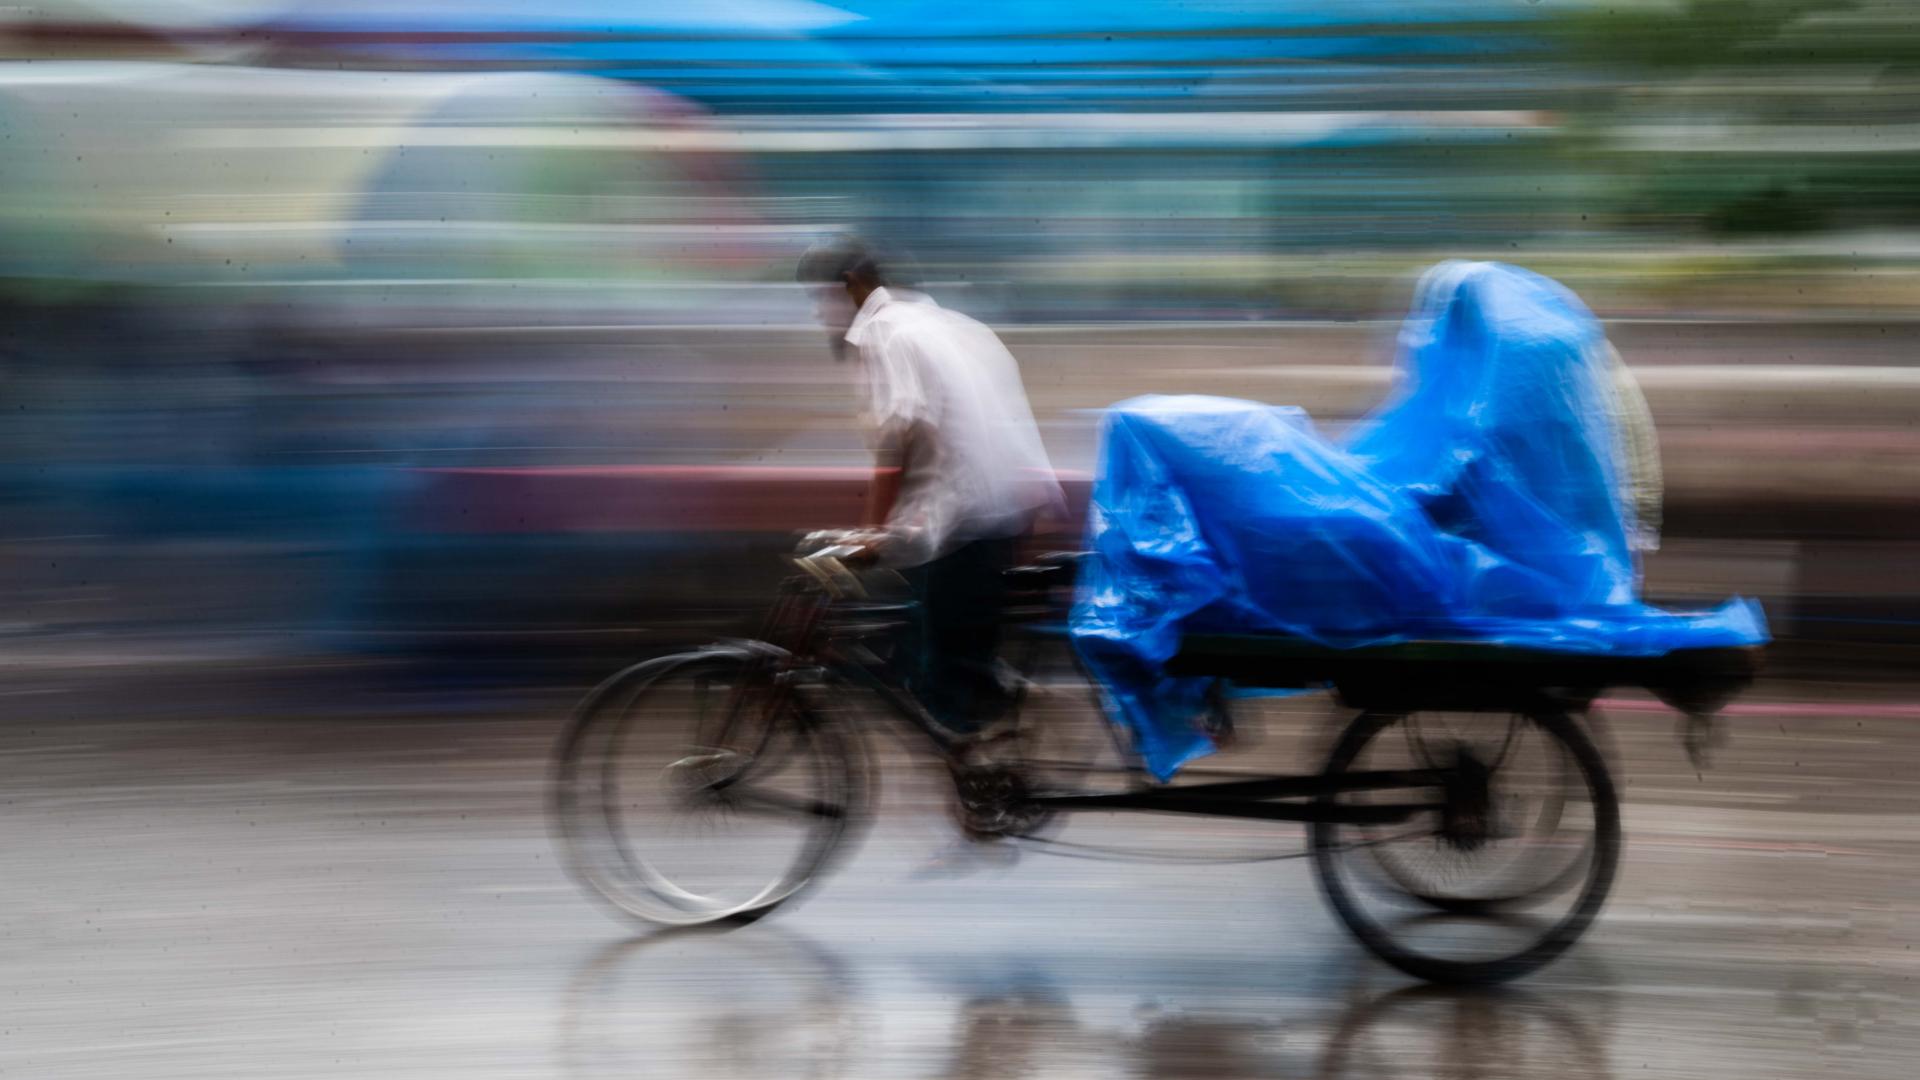 European Photography Awards Winner - Colors in Motion